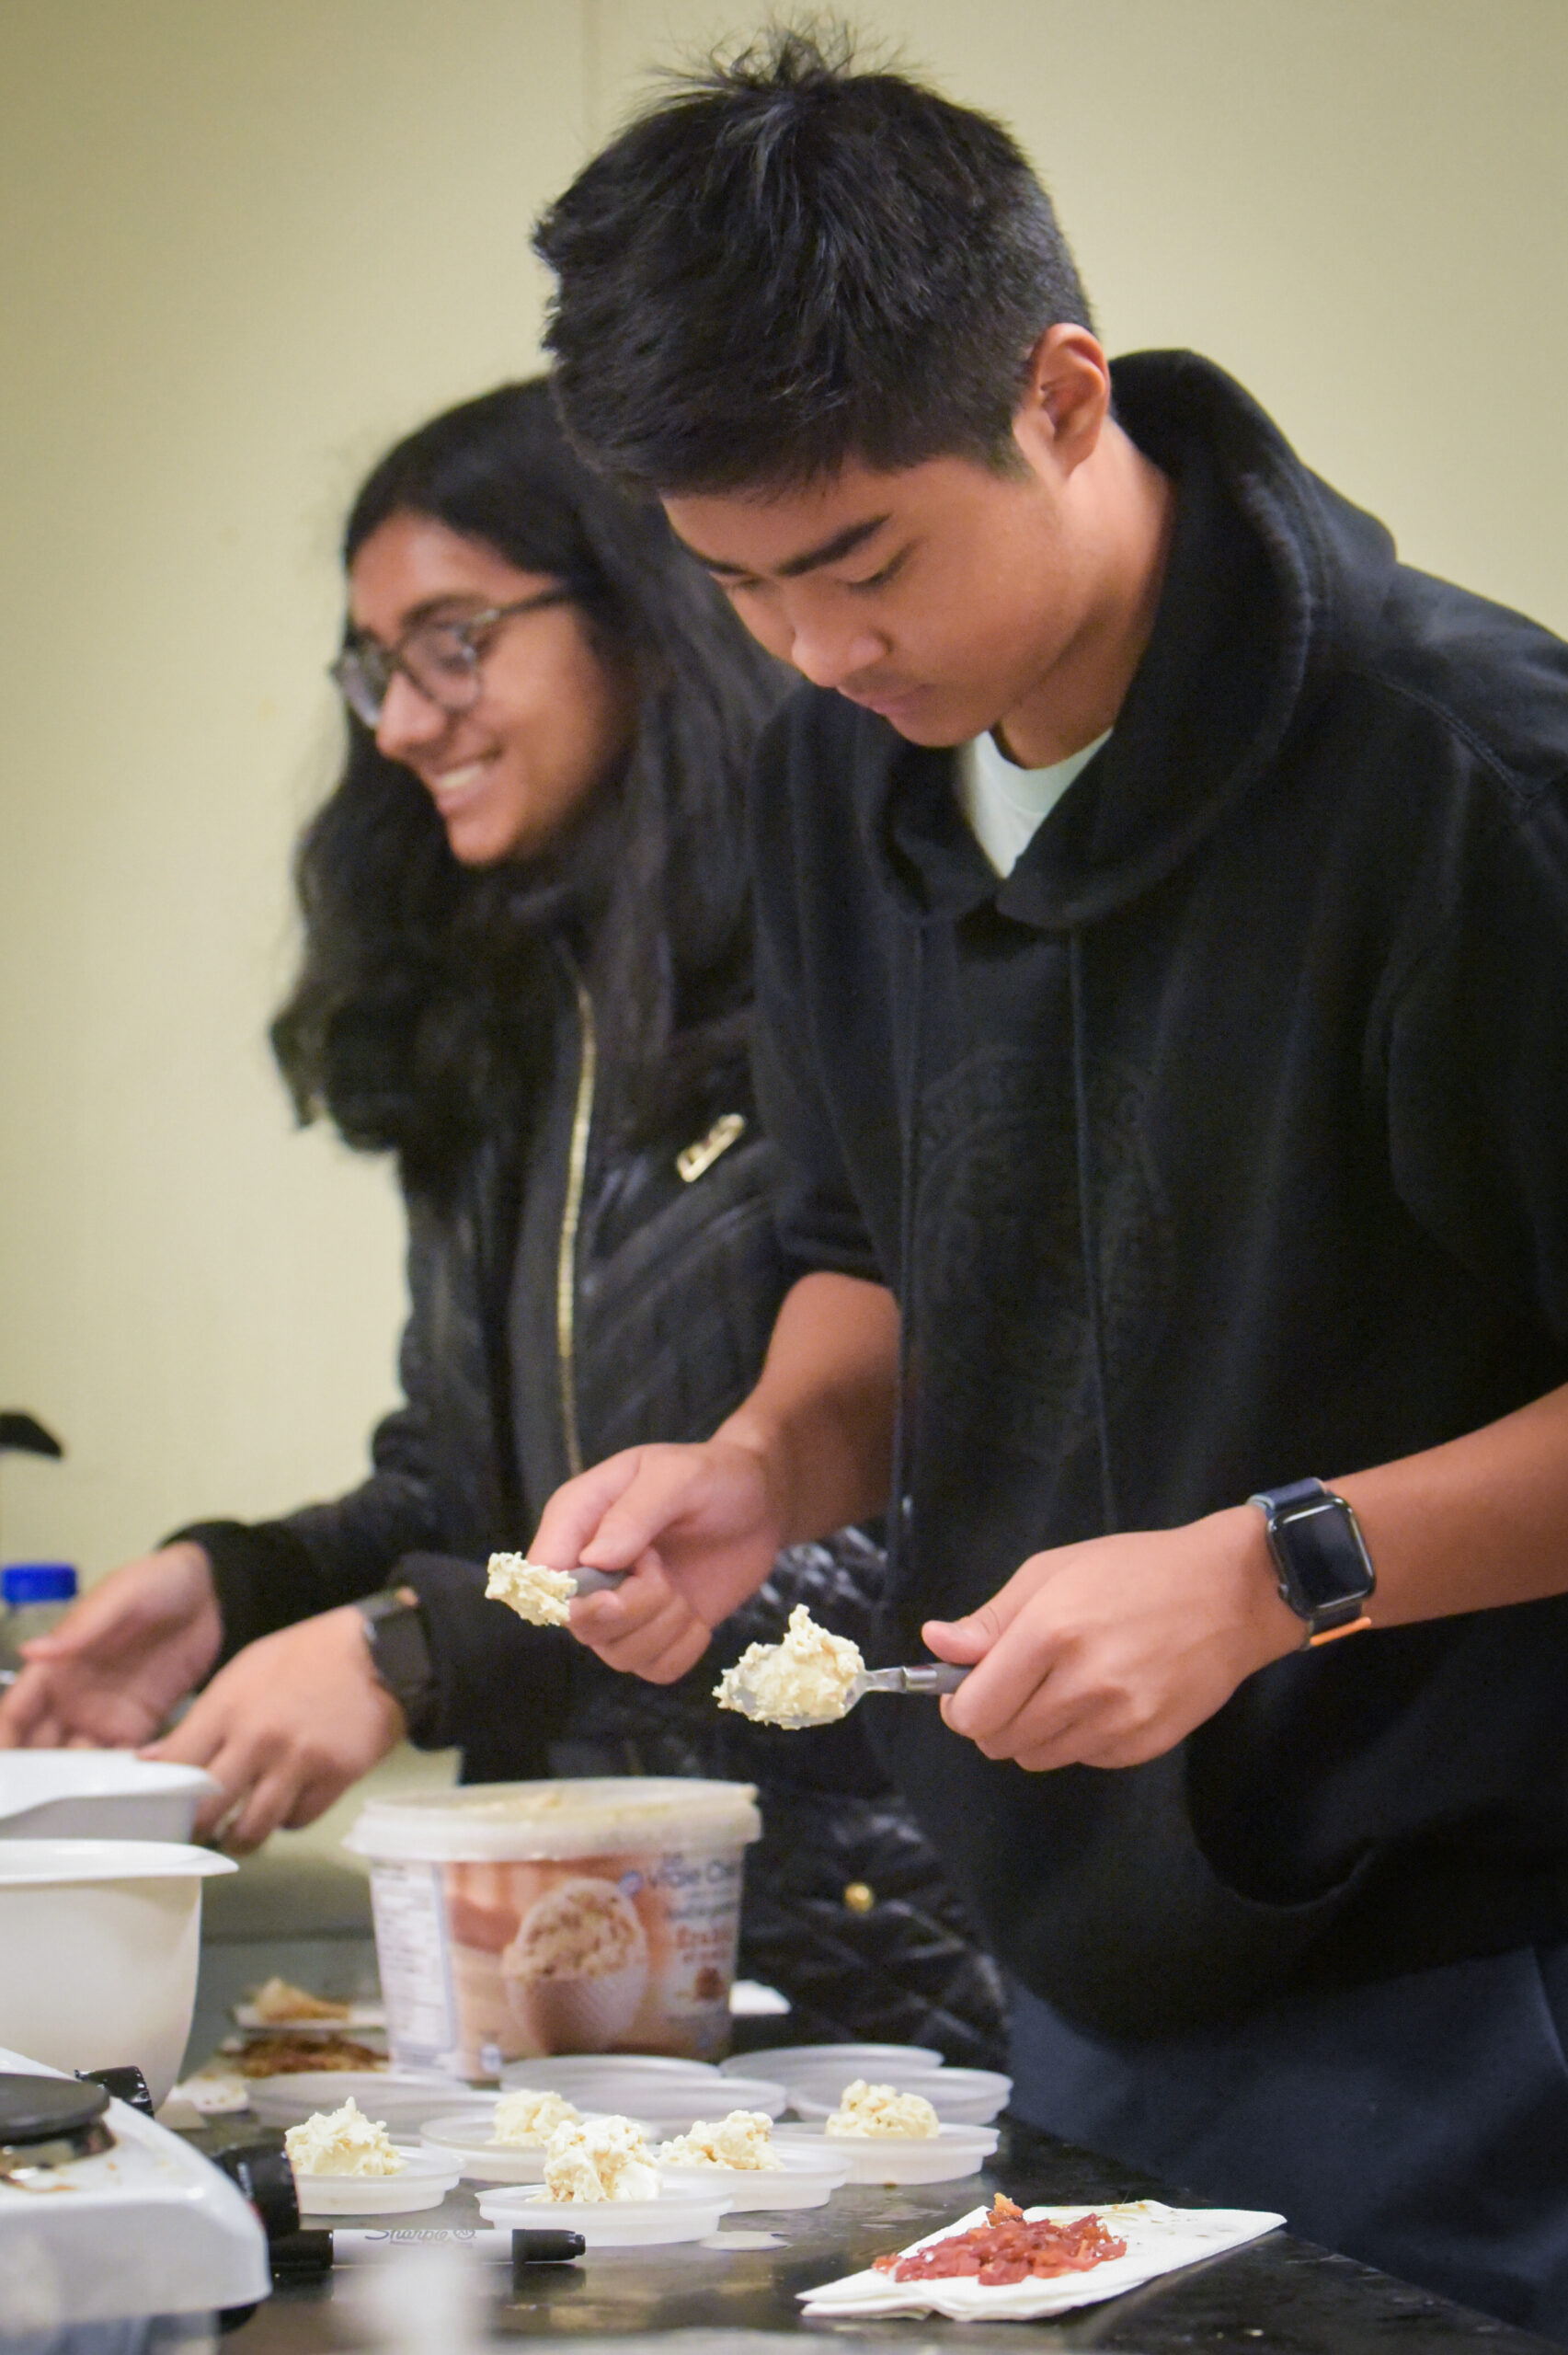 Two students scooping mashed food product onto small plastic dishes